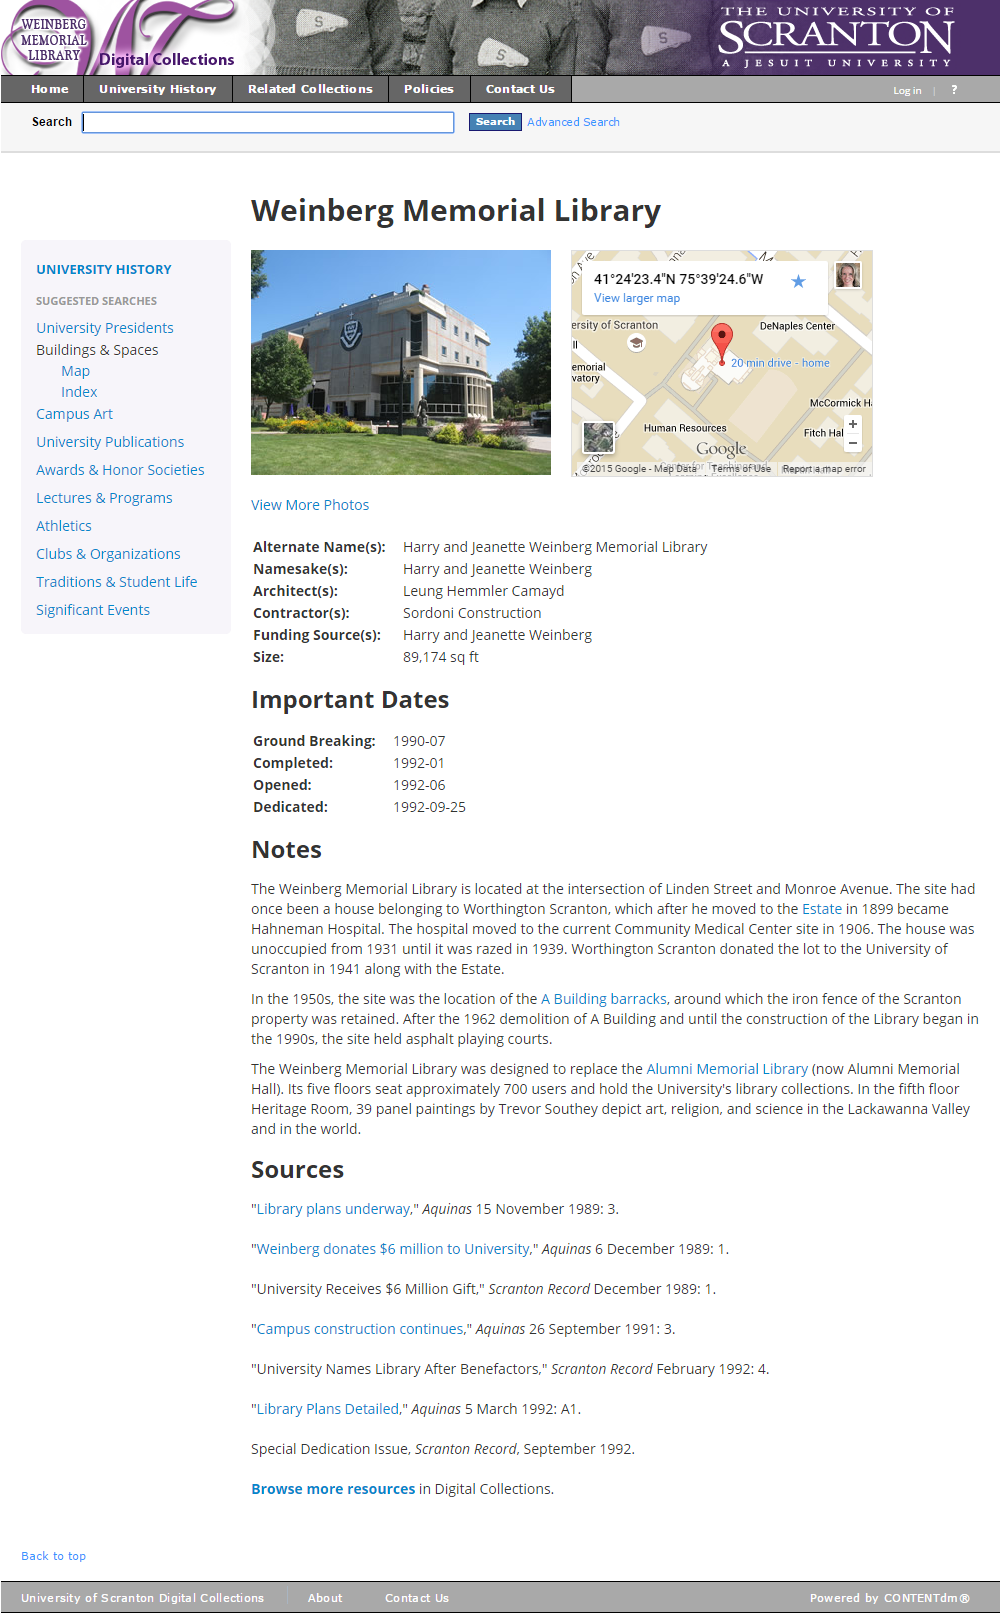 WML Building Page, 2015